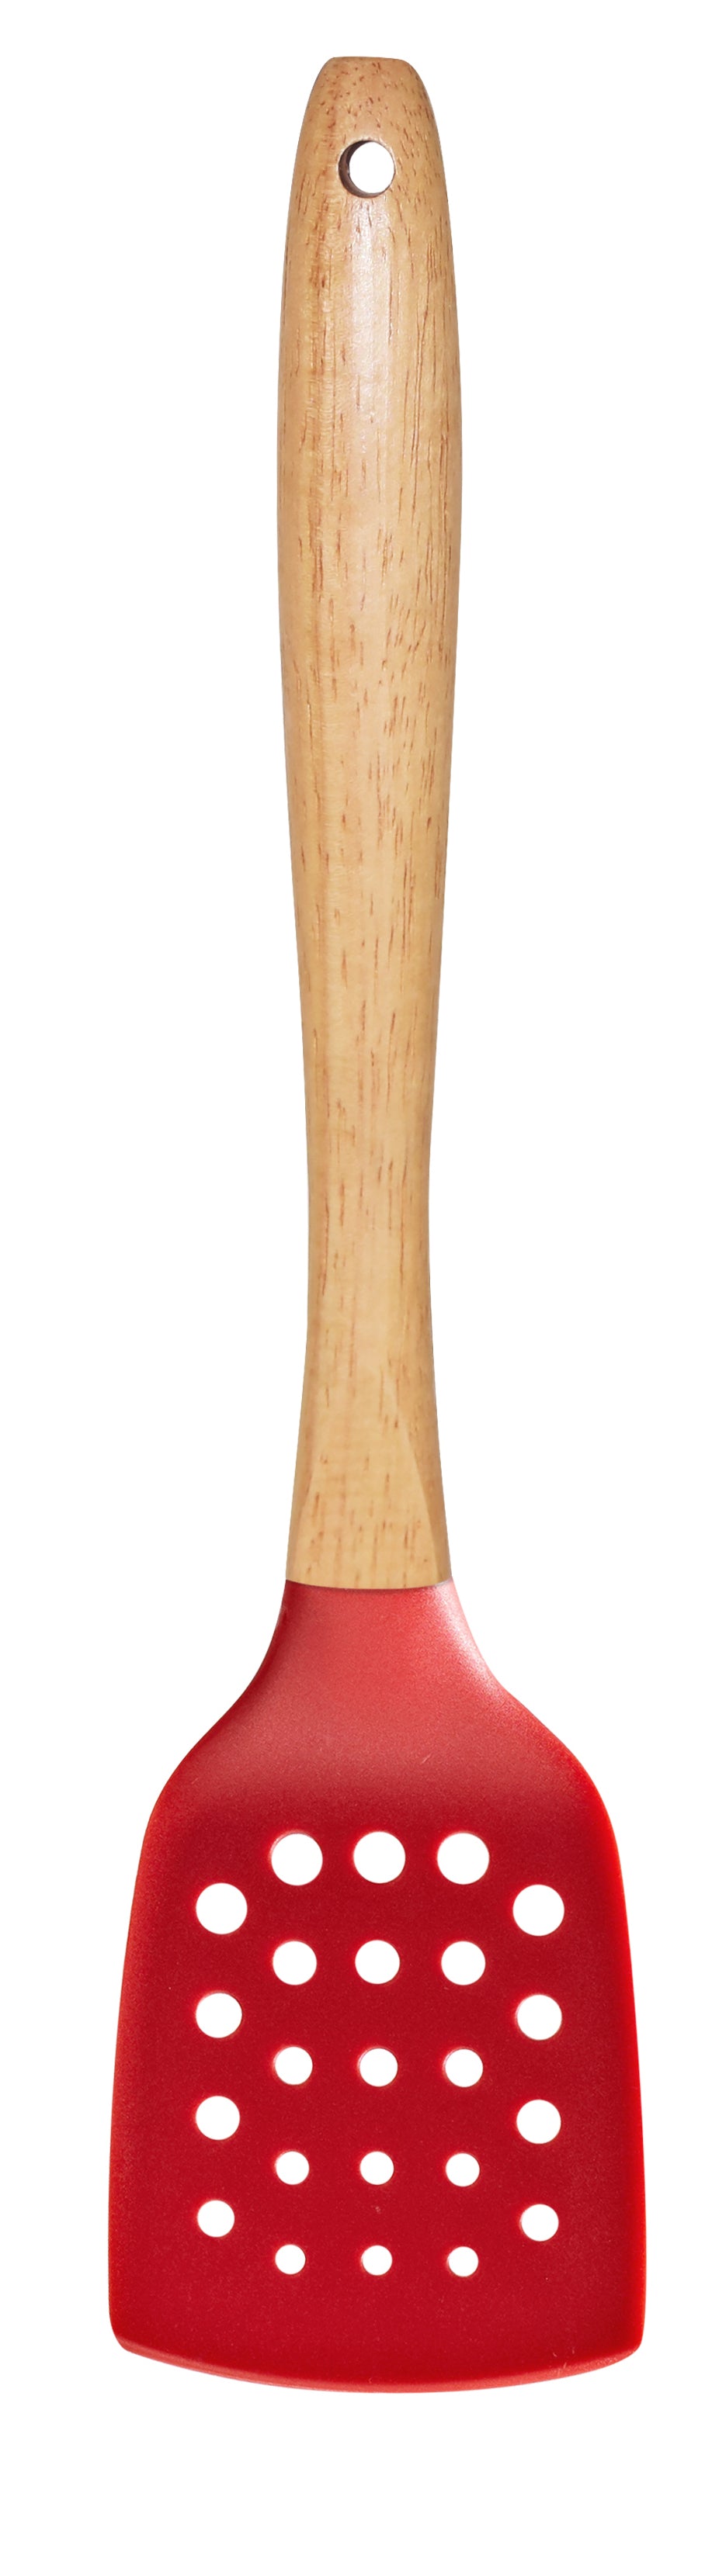 Bene Casa 14 Nylon Spatula with Wooden Handle, Red